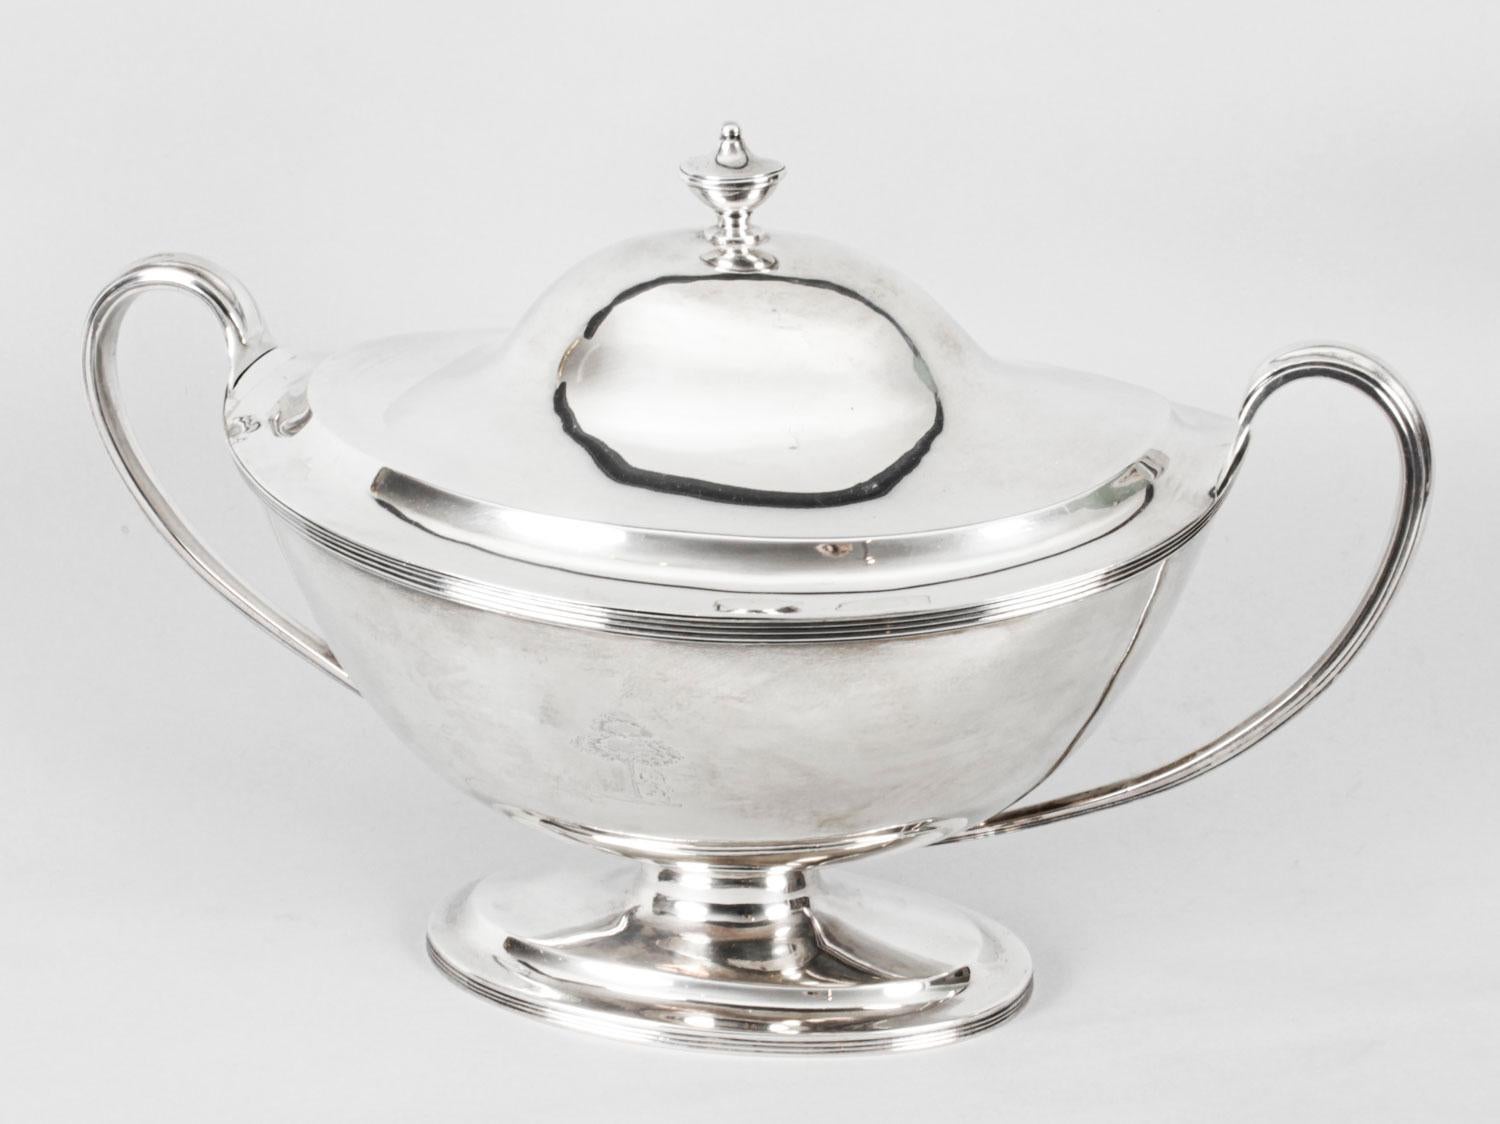 This is a beautiful antique English George III sterling silver tureen and lid, with hallmarks for London 1808 and the makers mark WB for William Bennett.

The tureen is beautiful in its simplicity.

There is an engraved crest and a fabulous coat